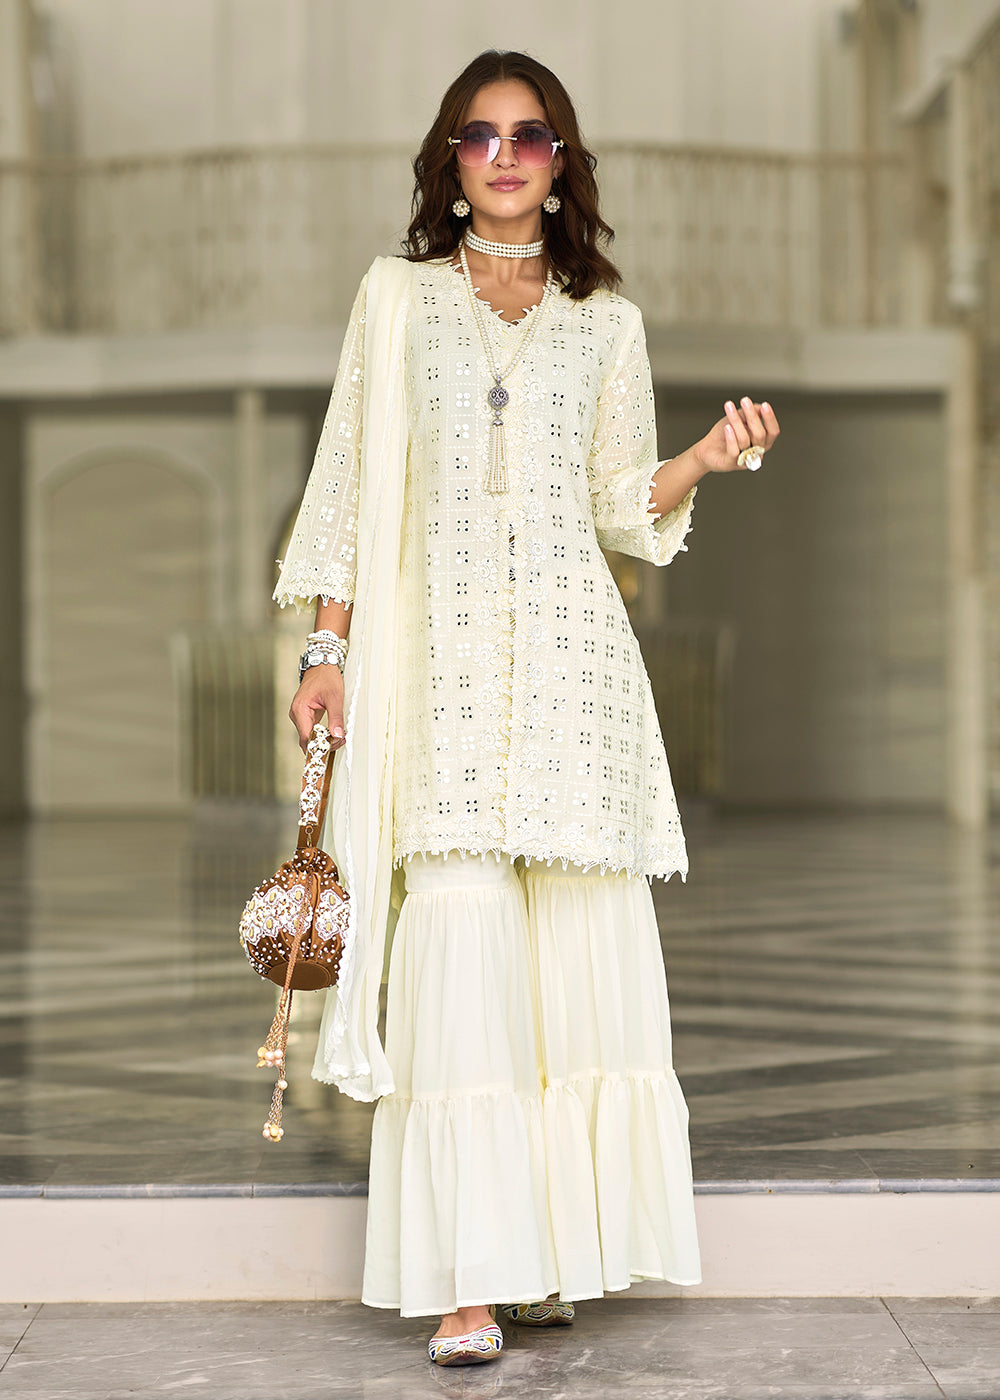 Shop Now Pleasing White Fancy Embroidered Festive Gharara Suit Online at Empress Clothing in USA, UK, Canada, Italy & Worldwide. 